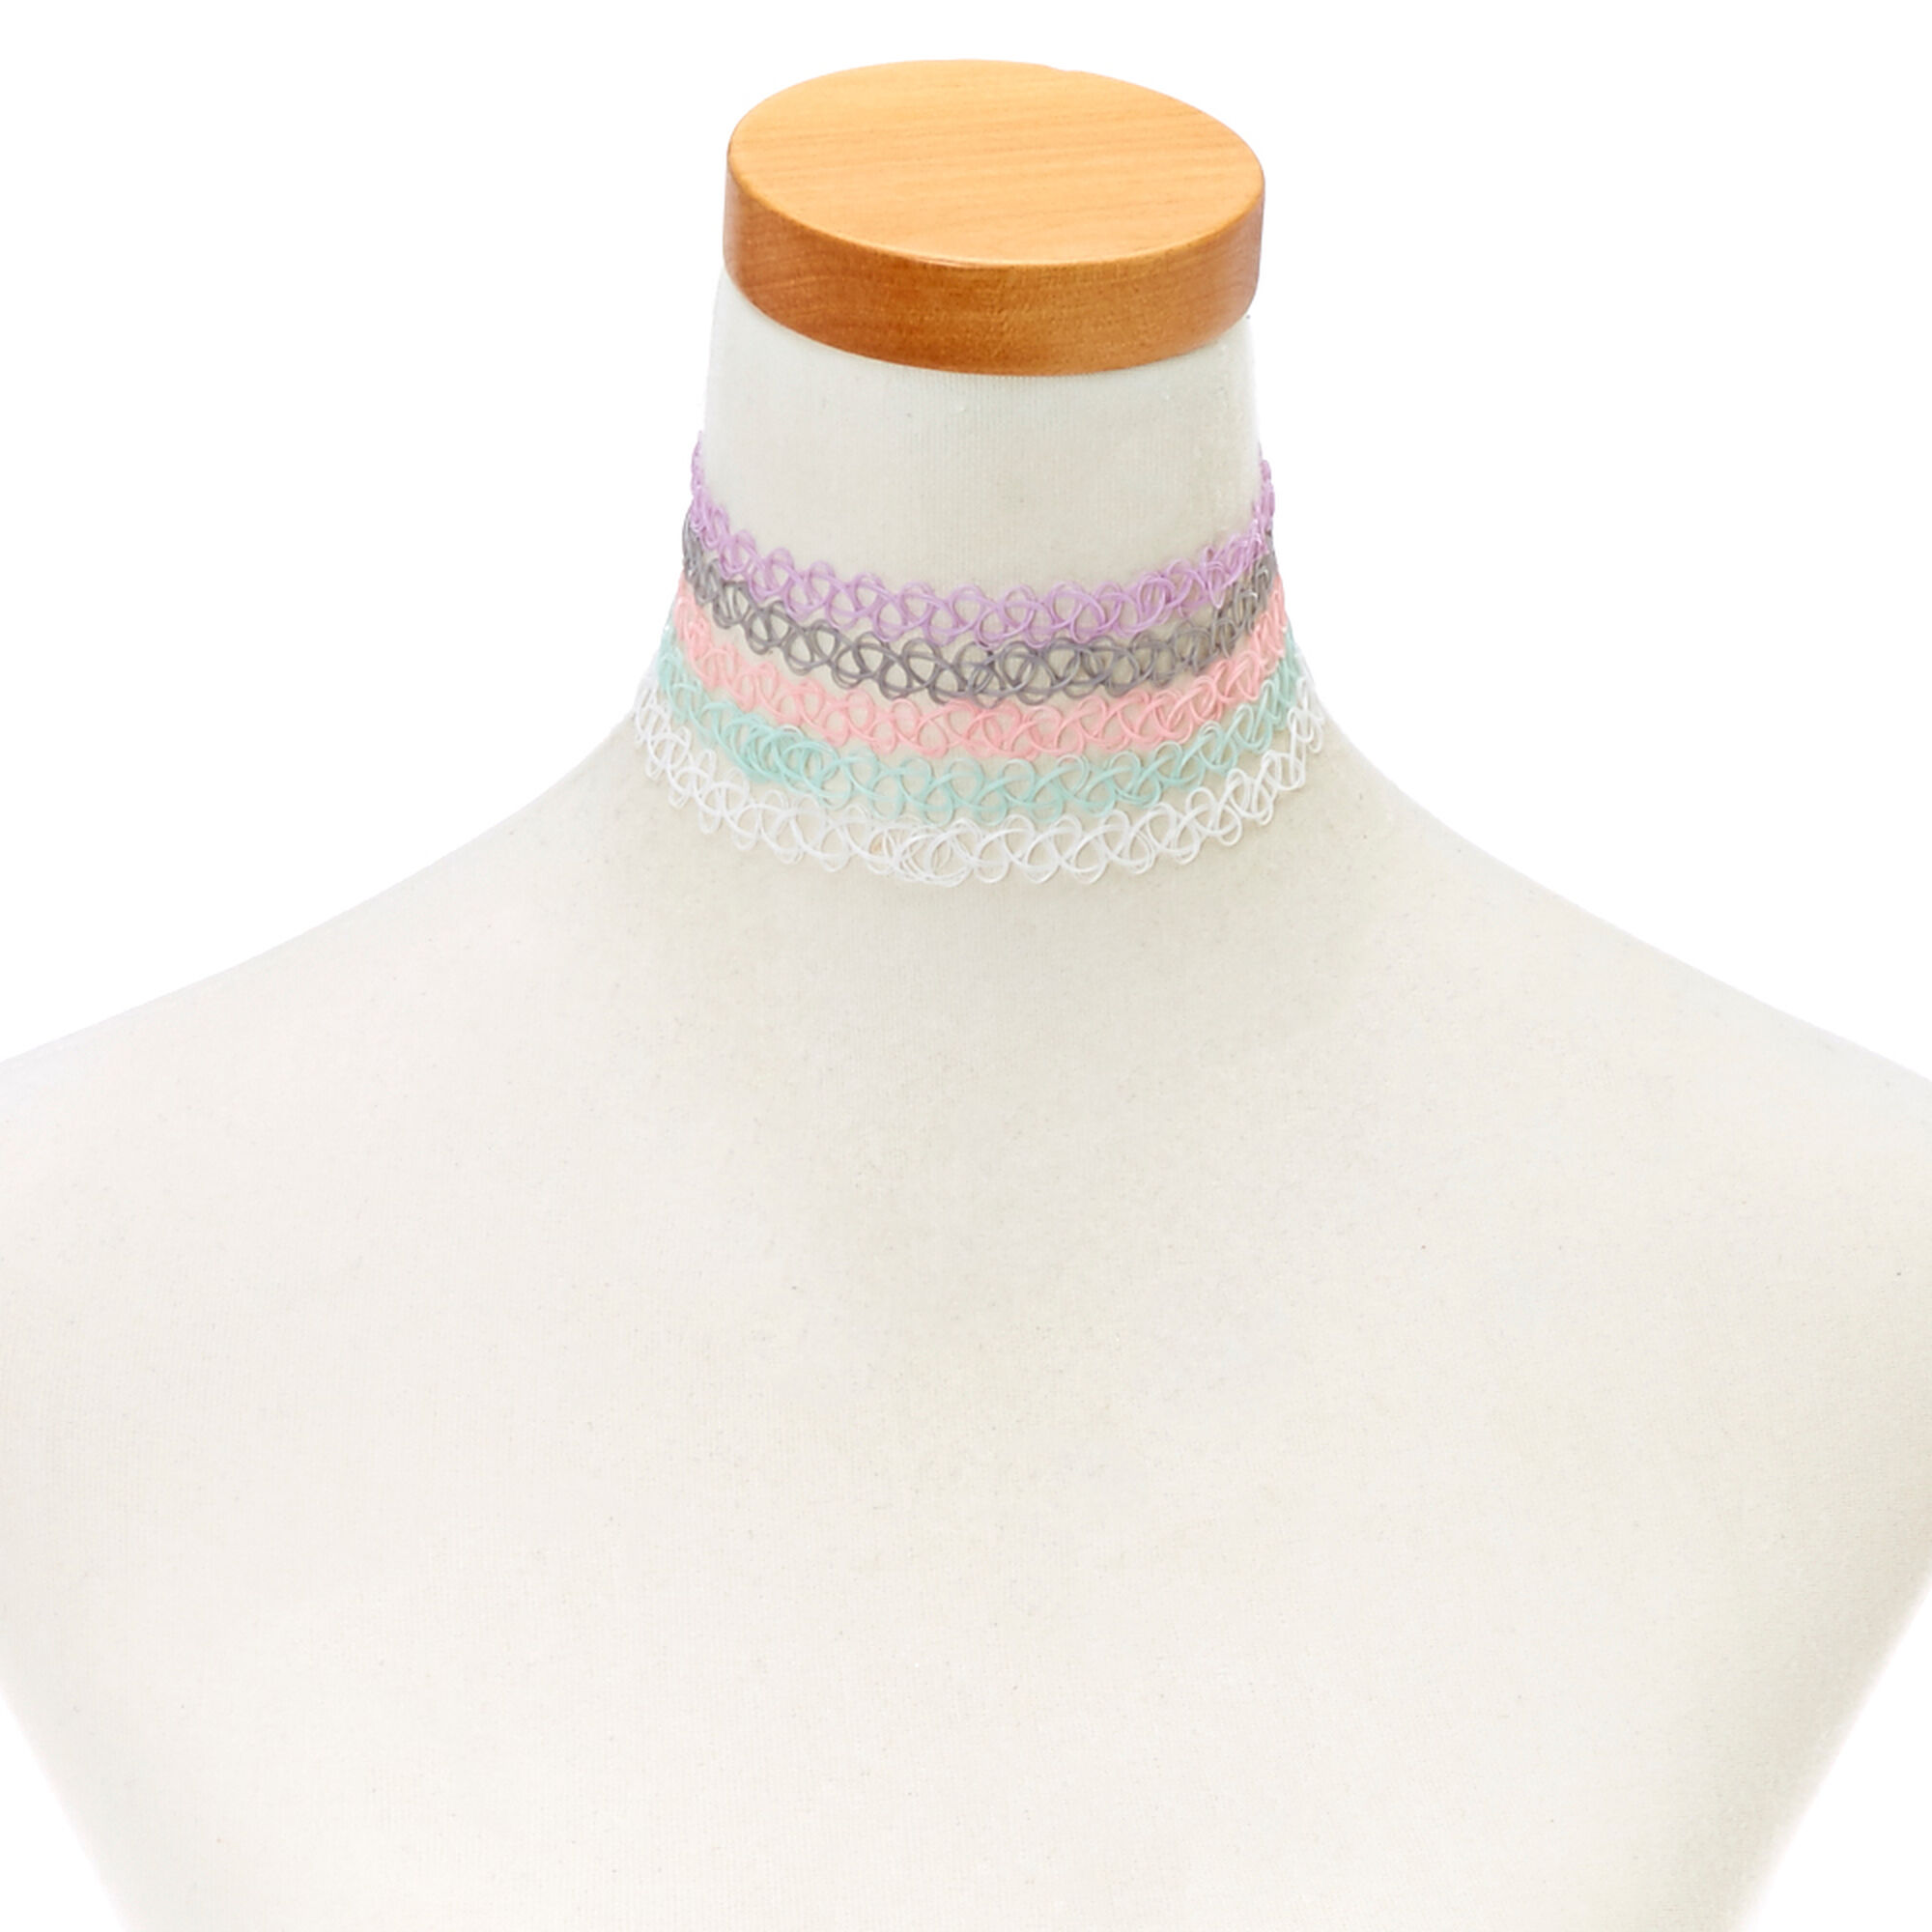 View Claires Pastel Tattoo Choker Necklaces 5 Pack information